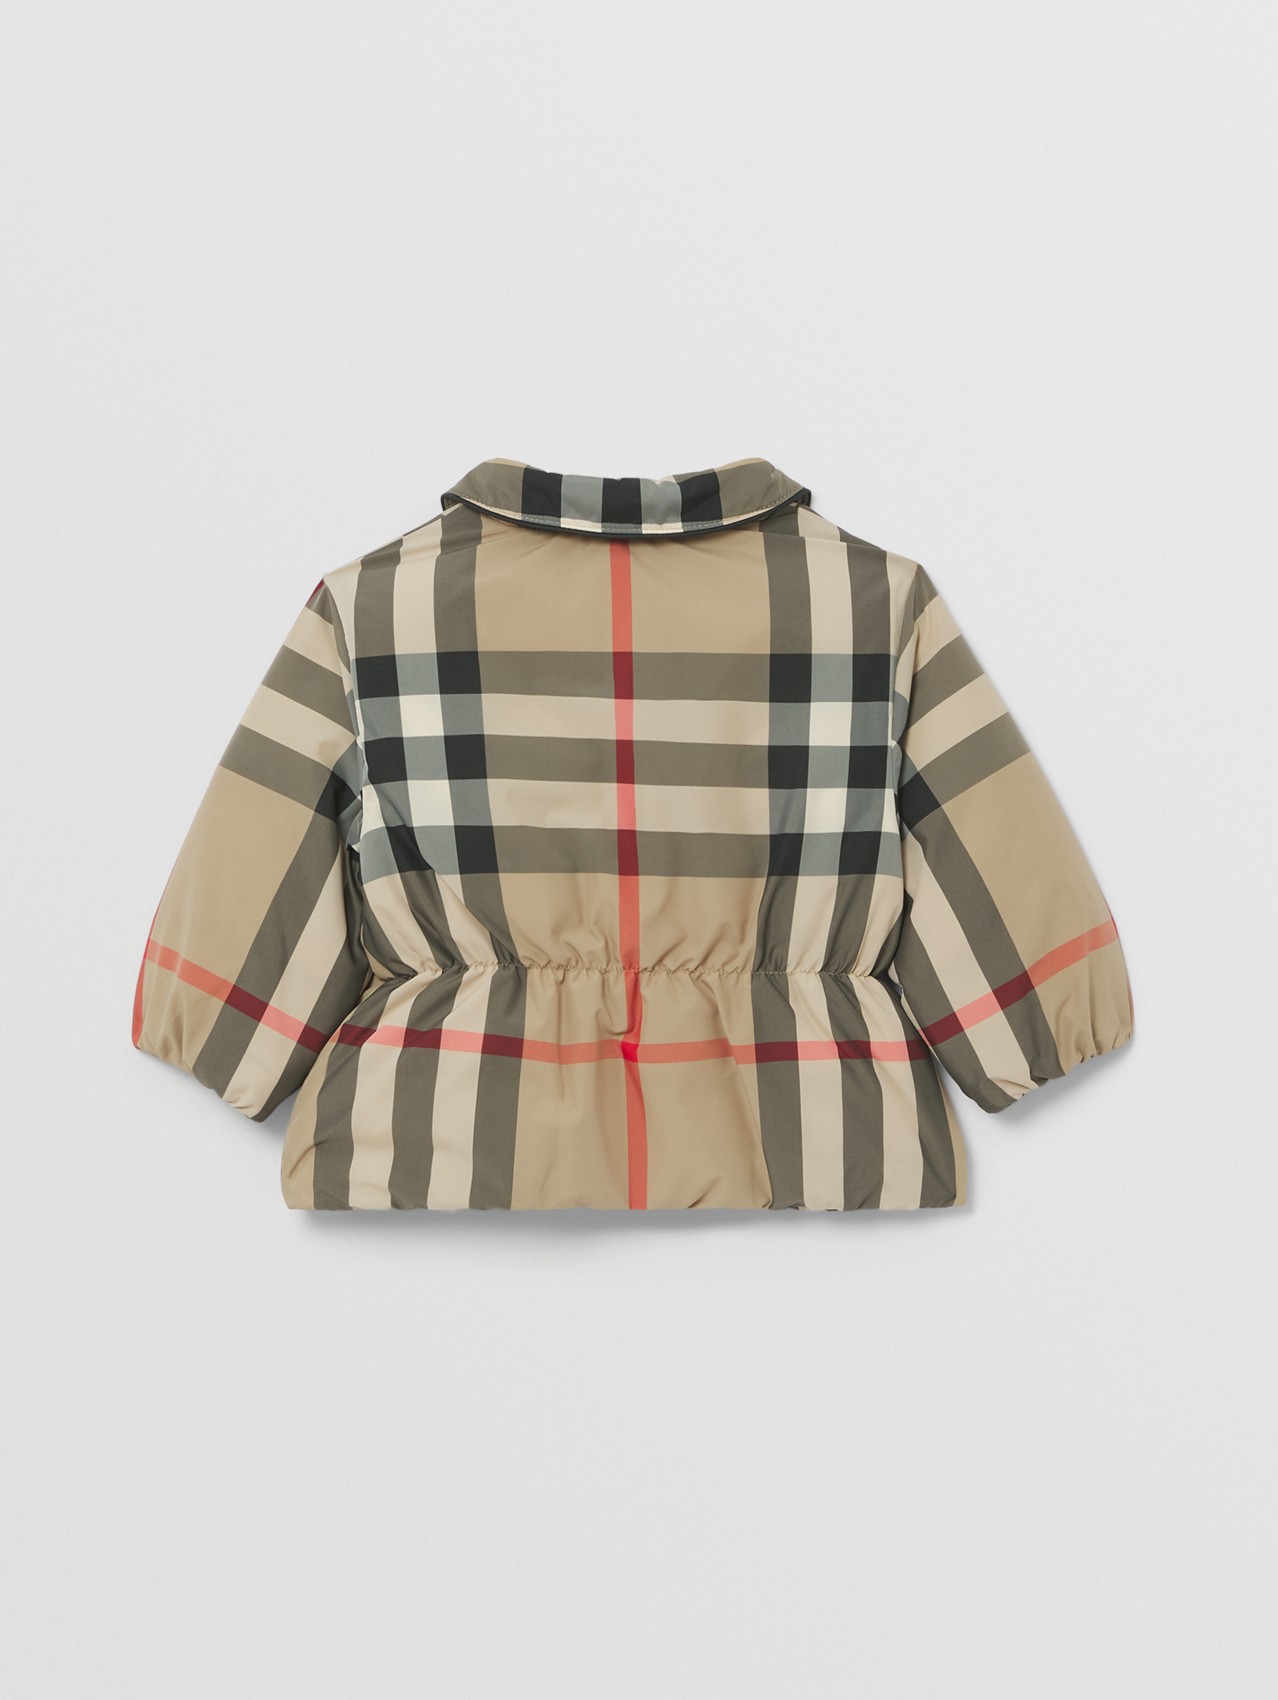 Peter Pan Collar Down-filled Check Jacket in Archive Beige